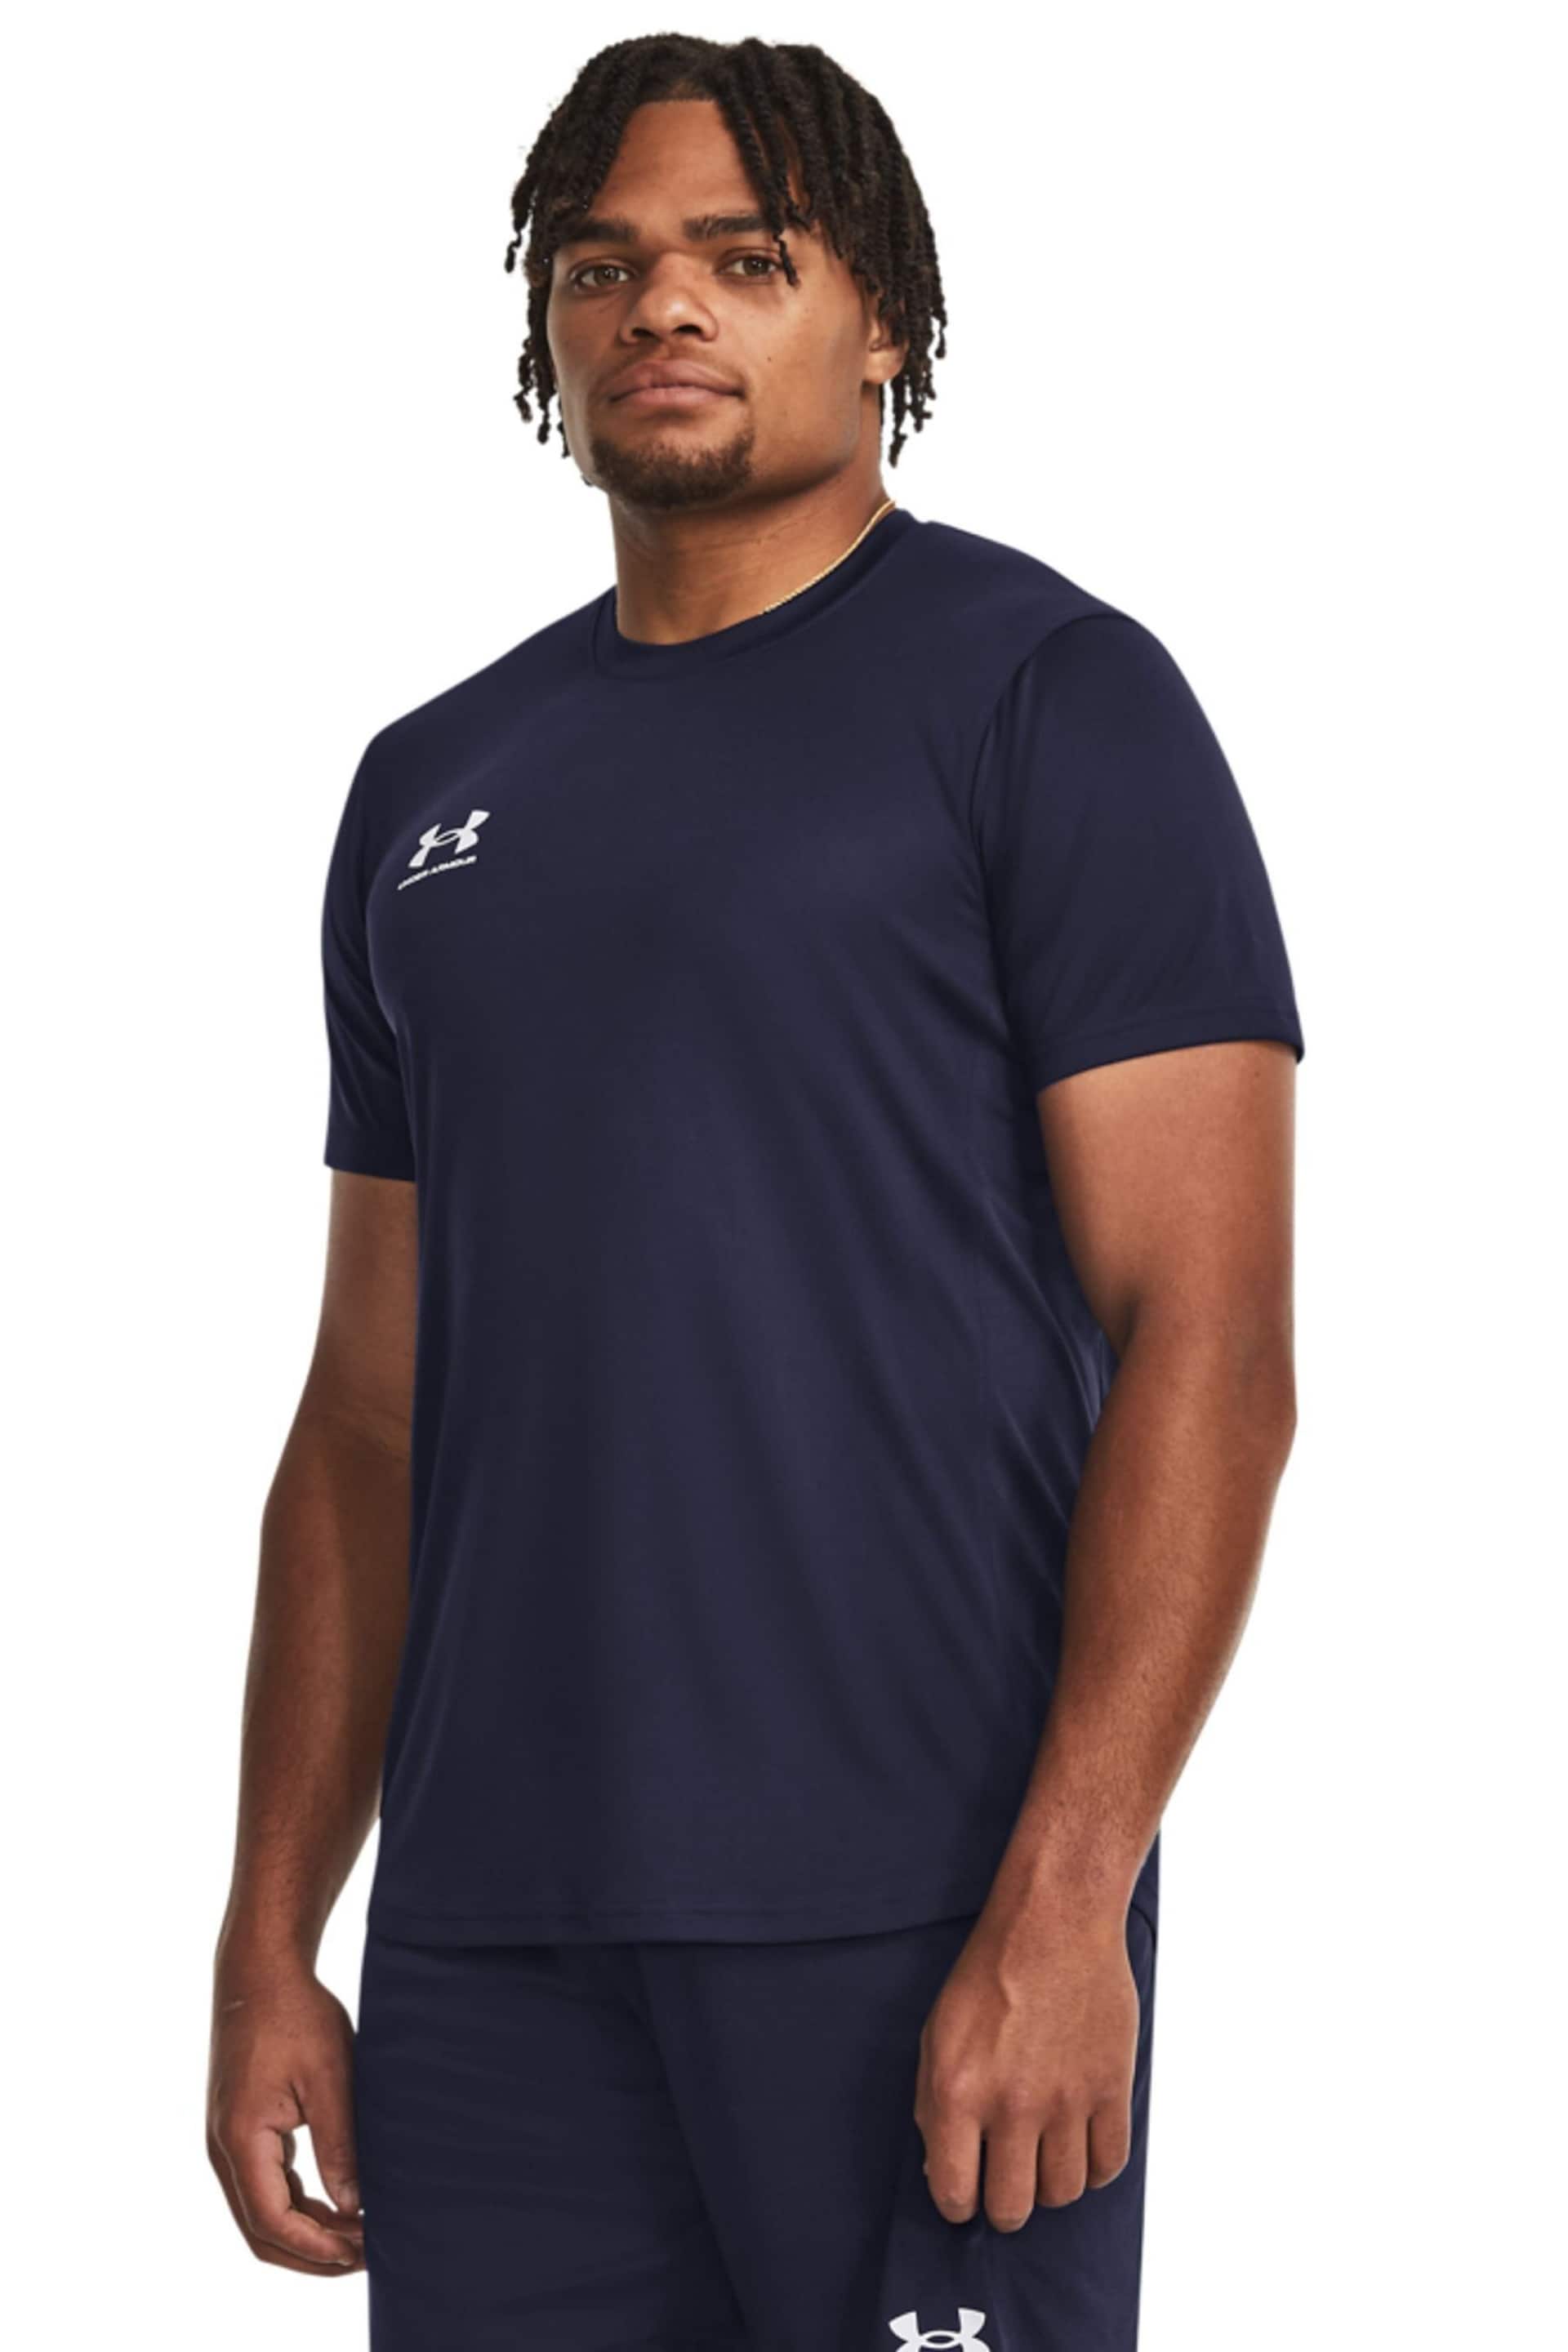 Under Armour Blue Challenger Train Short Sleeve T-Shirt - Image 1 of 4